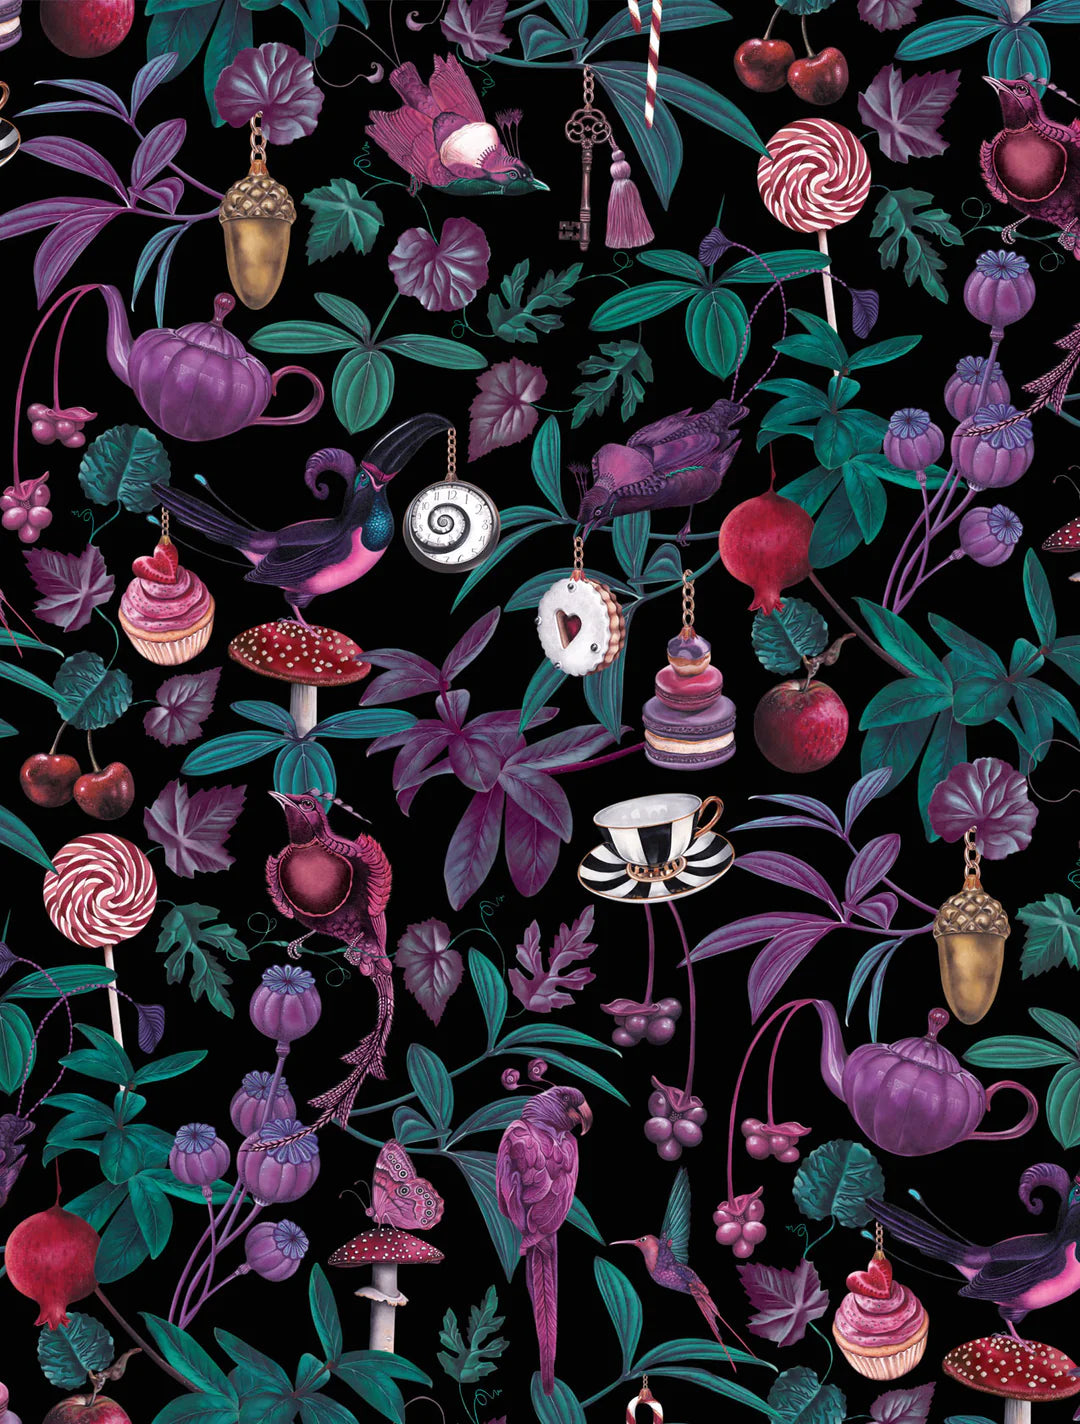 Witch-and-watchman-Belladonna-wallpaper-black-dark-background-surreal-alice-in-wonderland-style-tea-party-cupcakes-mushrooms-candy-teapots-and-birds